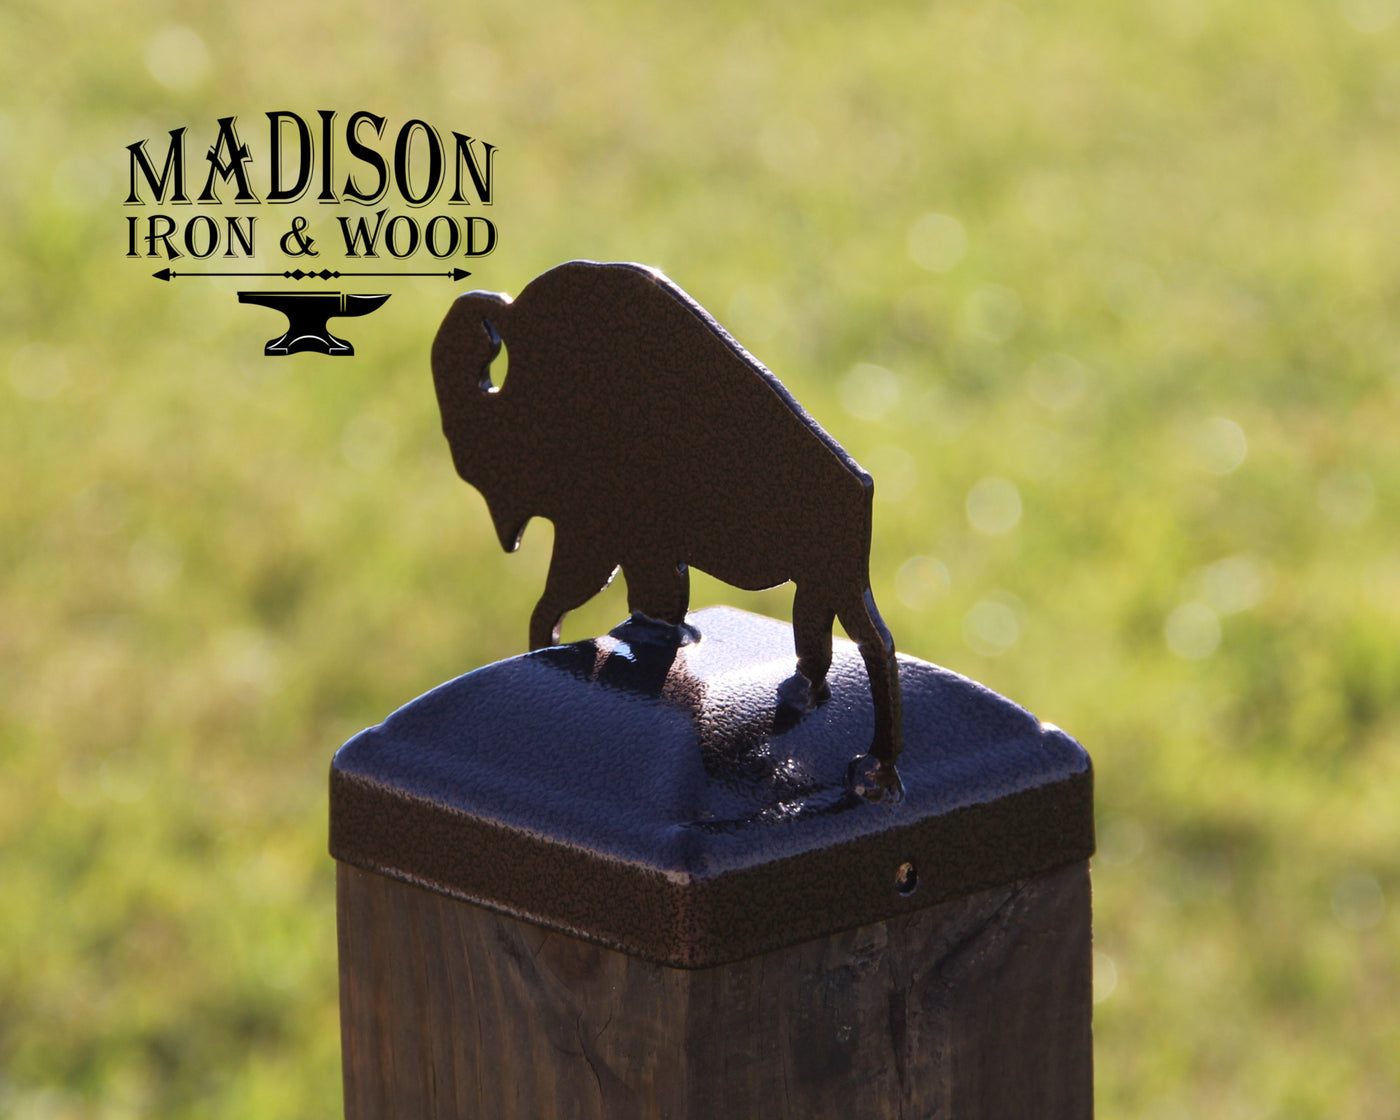 4x4 Buffalo Post Cap - Madison Iron and Wood - Post Cap - metal outdoor decor - Steel deocrations - american made products - veteran owned business products - fencing decorations - fencing supplies - custom wall decorations - personalized wall signs - steel - decorative post caps - steel post caps - metal post caps - brackets - structural brackets - home improvement - easter - easter decorations - easter gift - easter yard decor